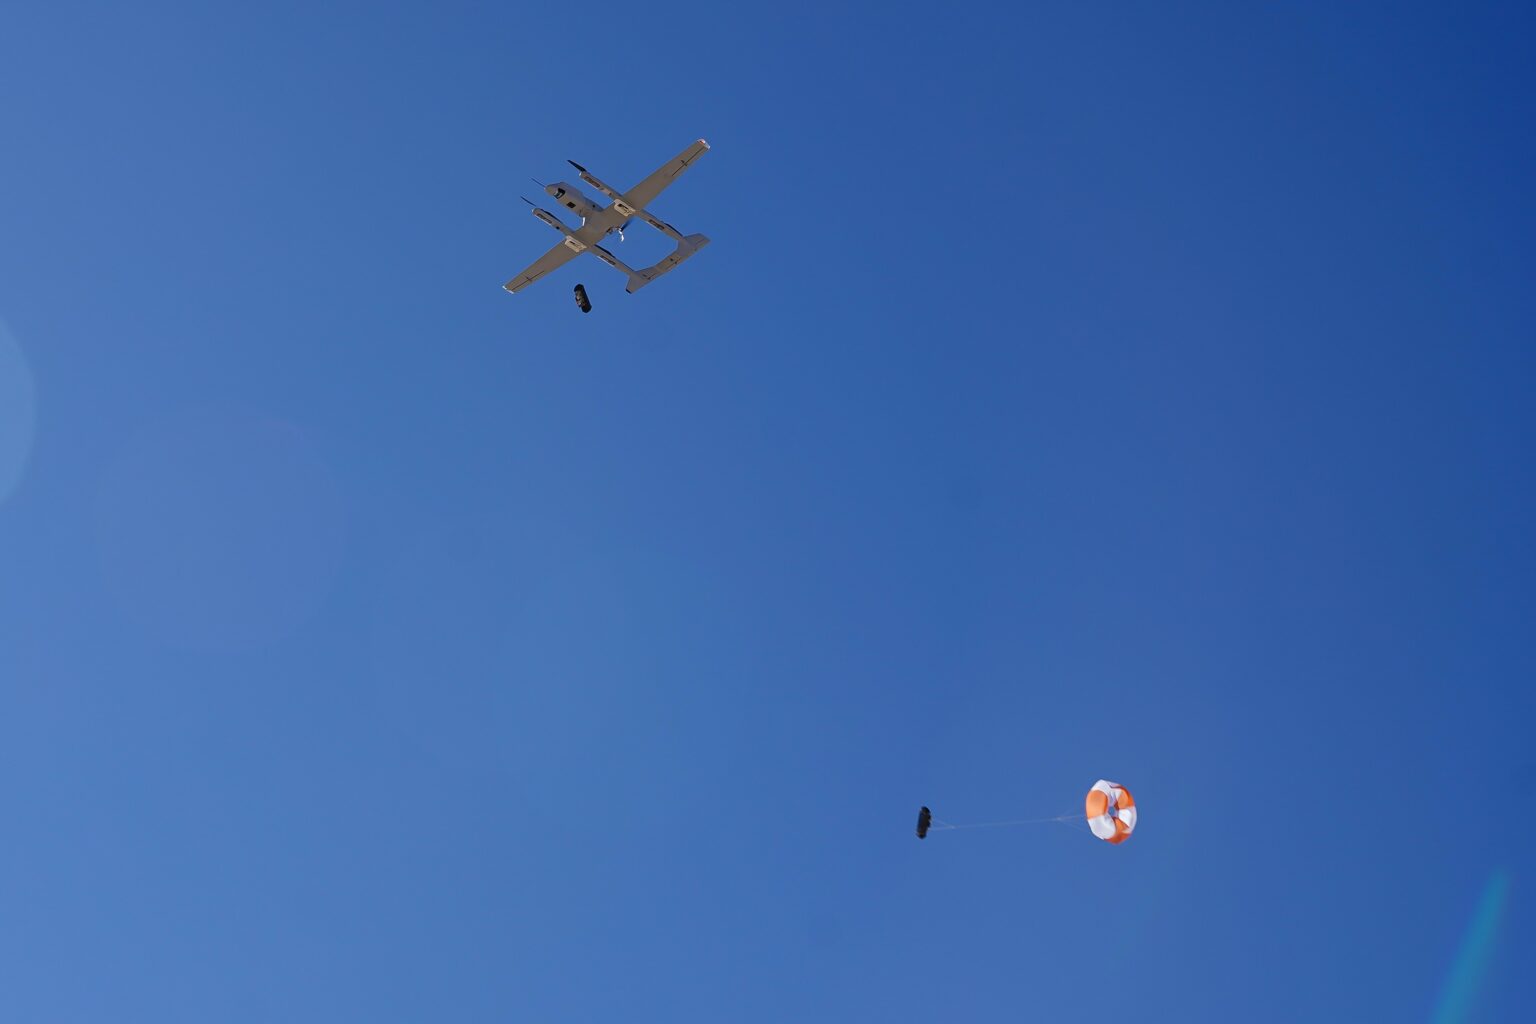 The US Army Group 3 Medical Drone delivers a payload during Project Convergence 22, Fort Irwin, Calif., Oct. 28, 2022. Image: Sgt. Thiem Huynh/ US Army